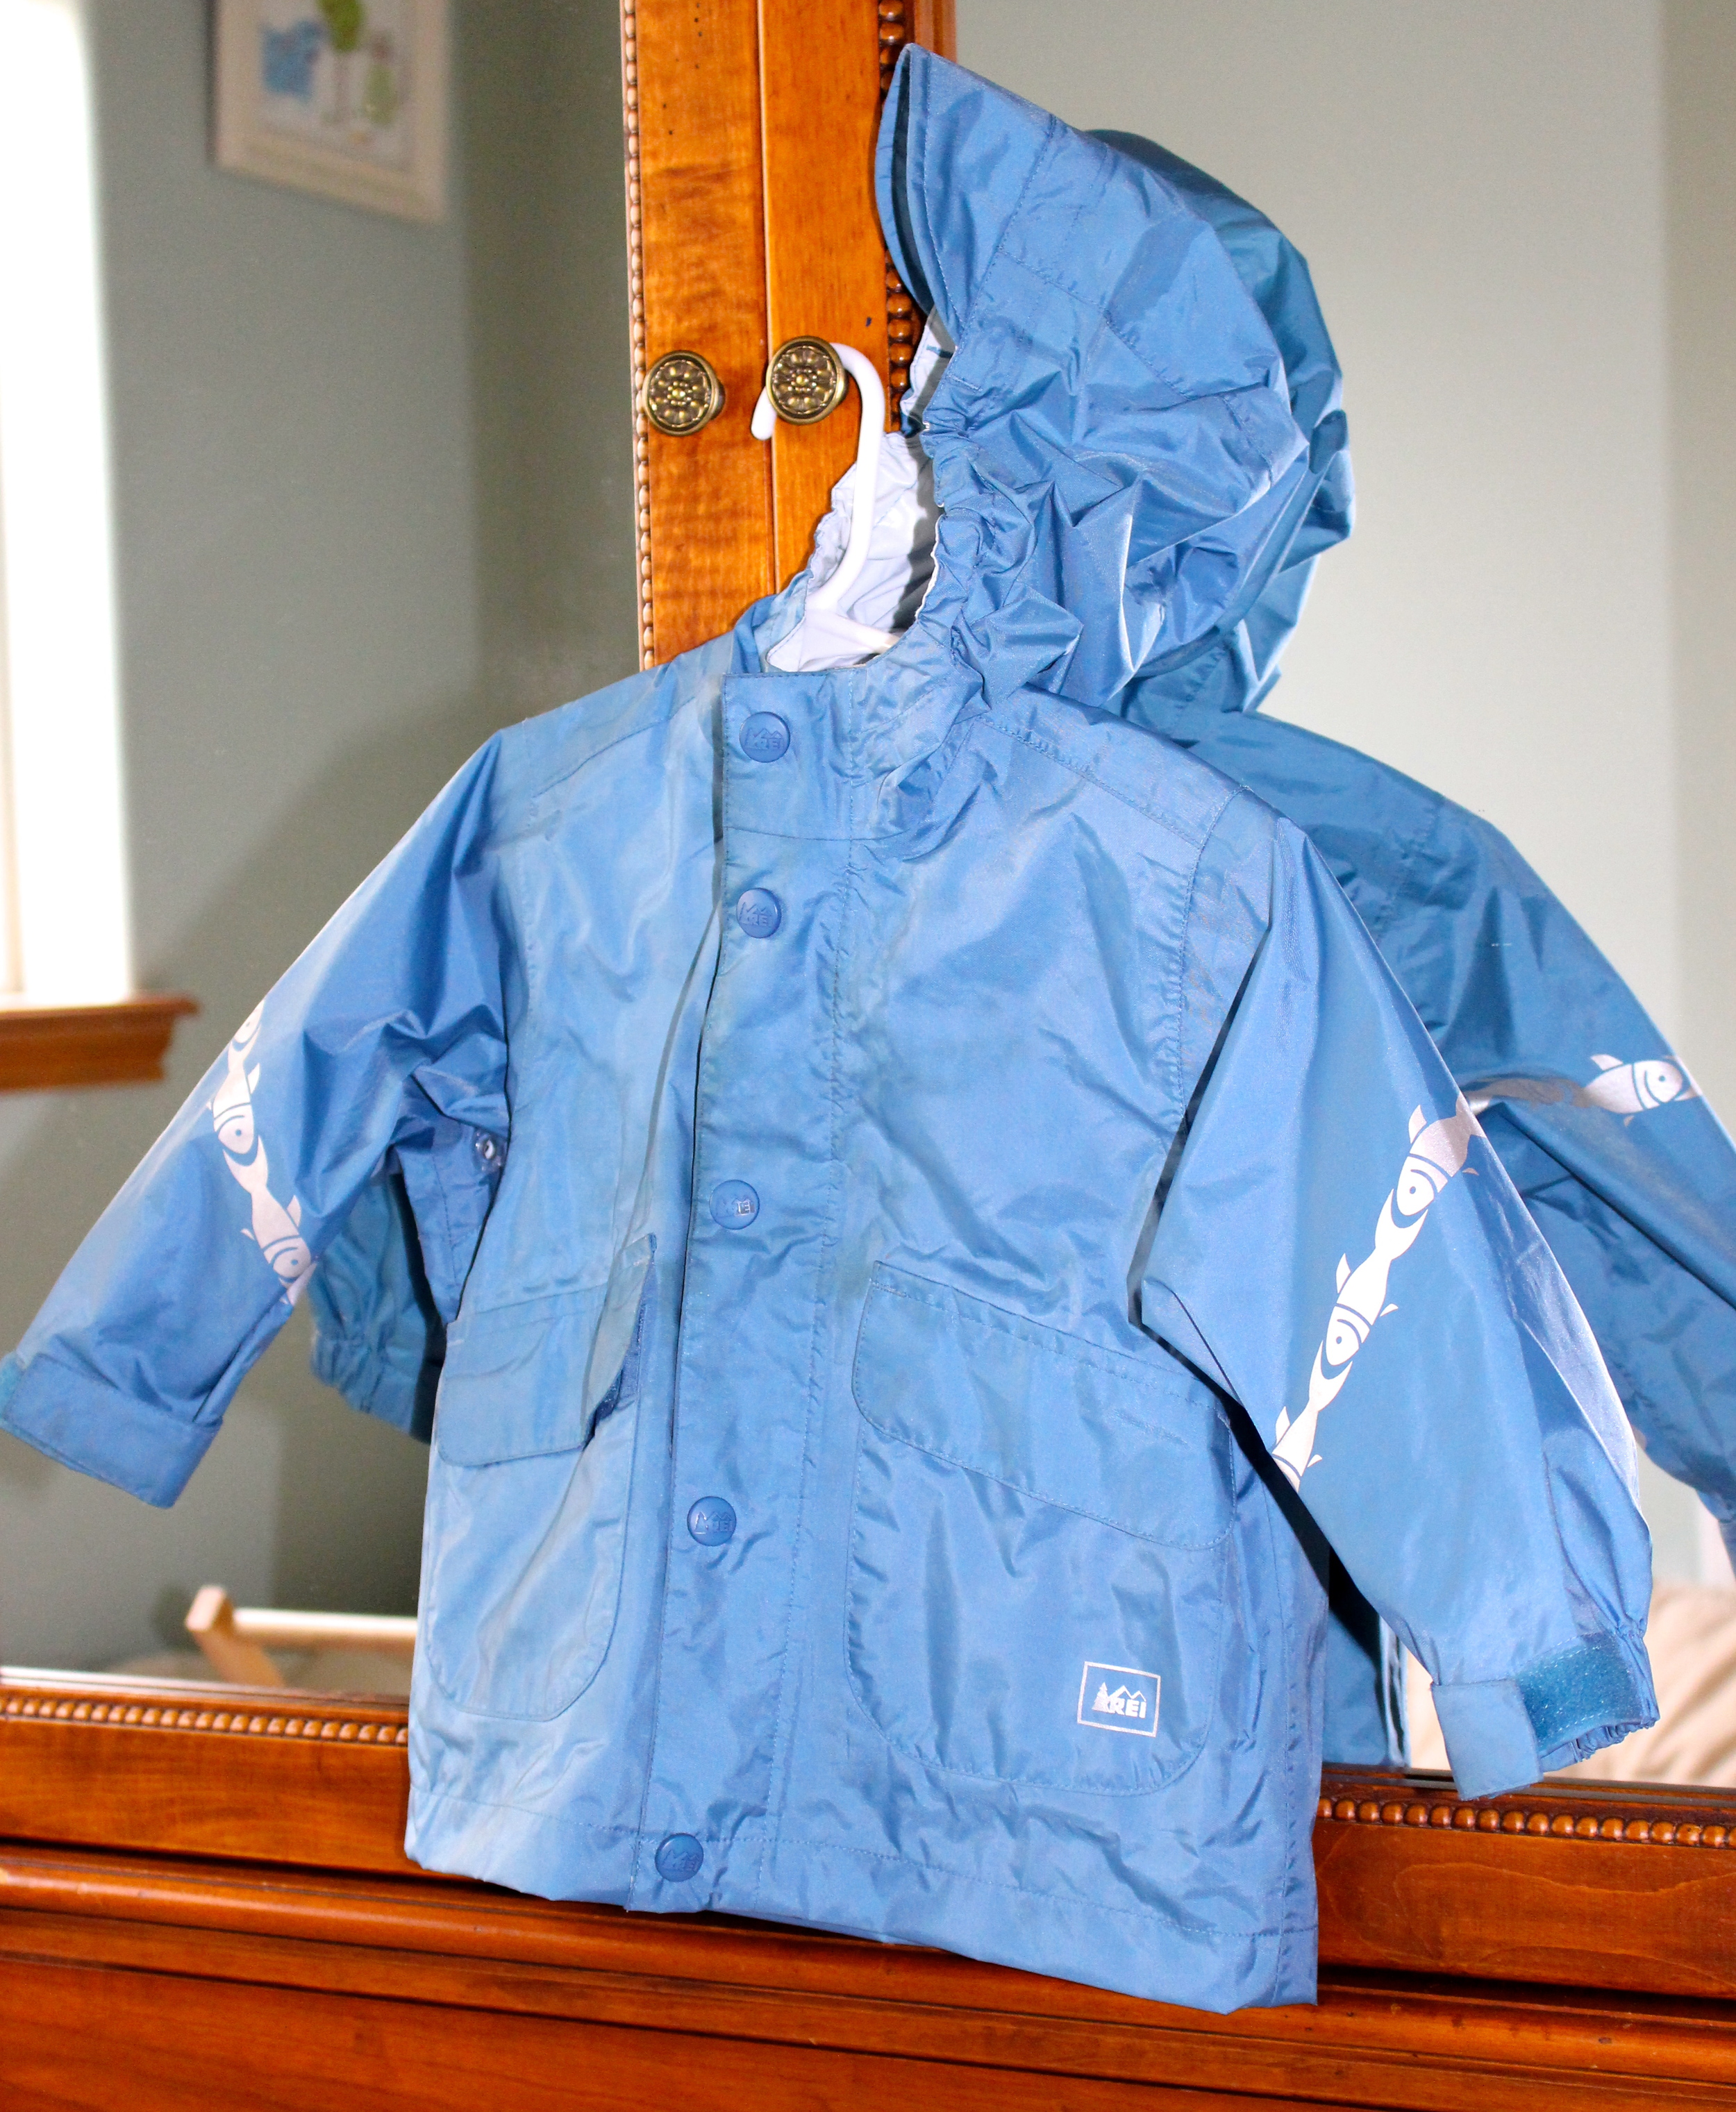 REI toddler raincoat from resale